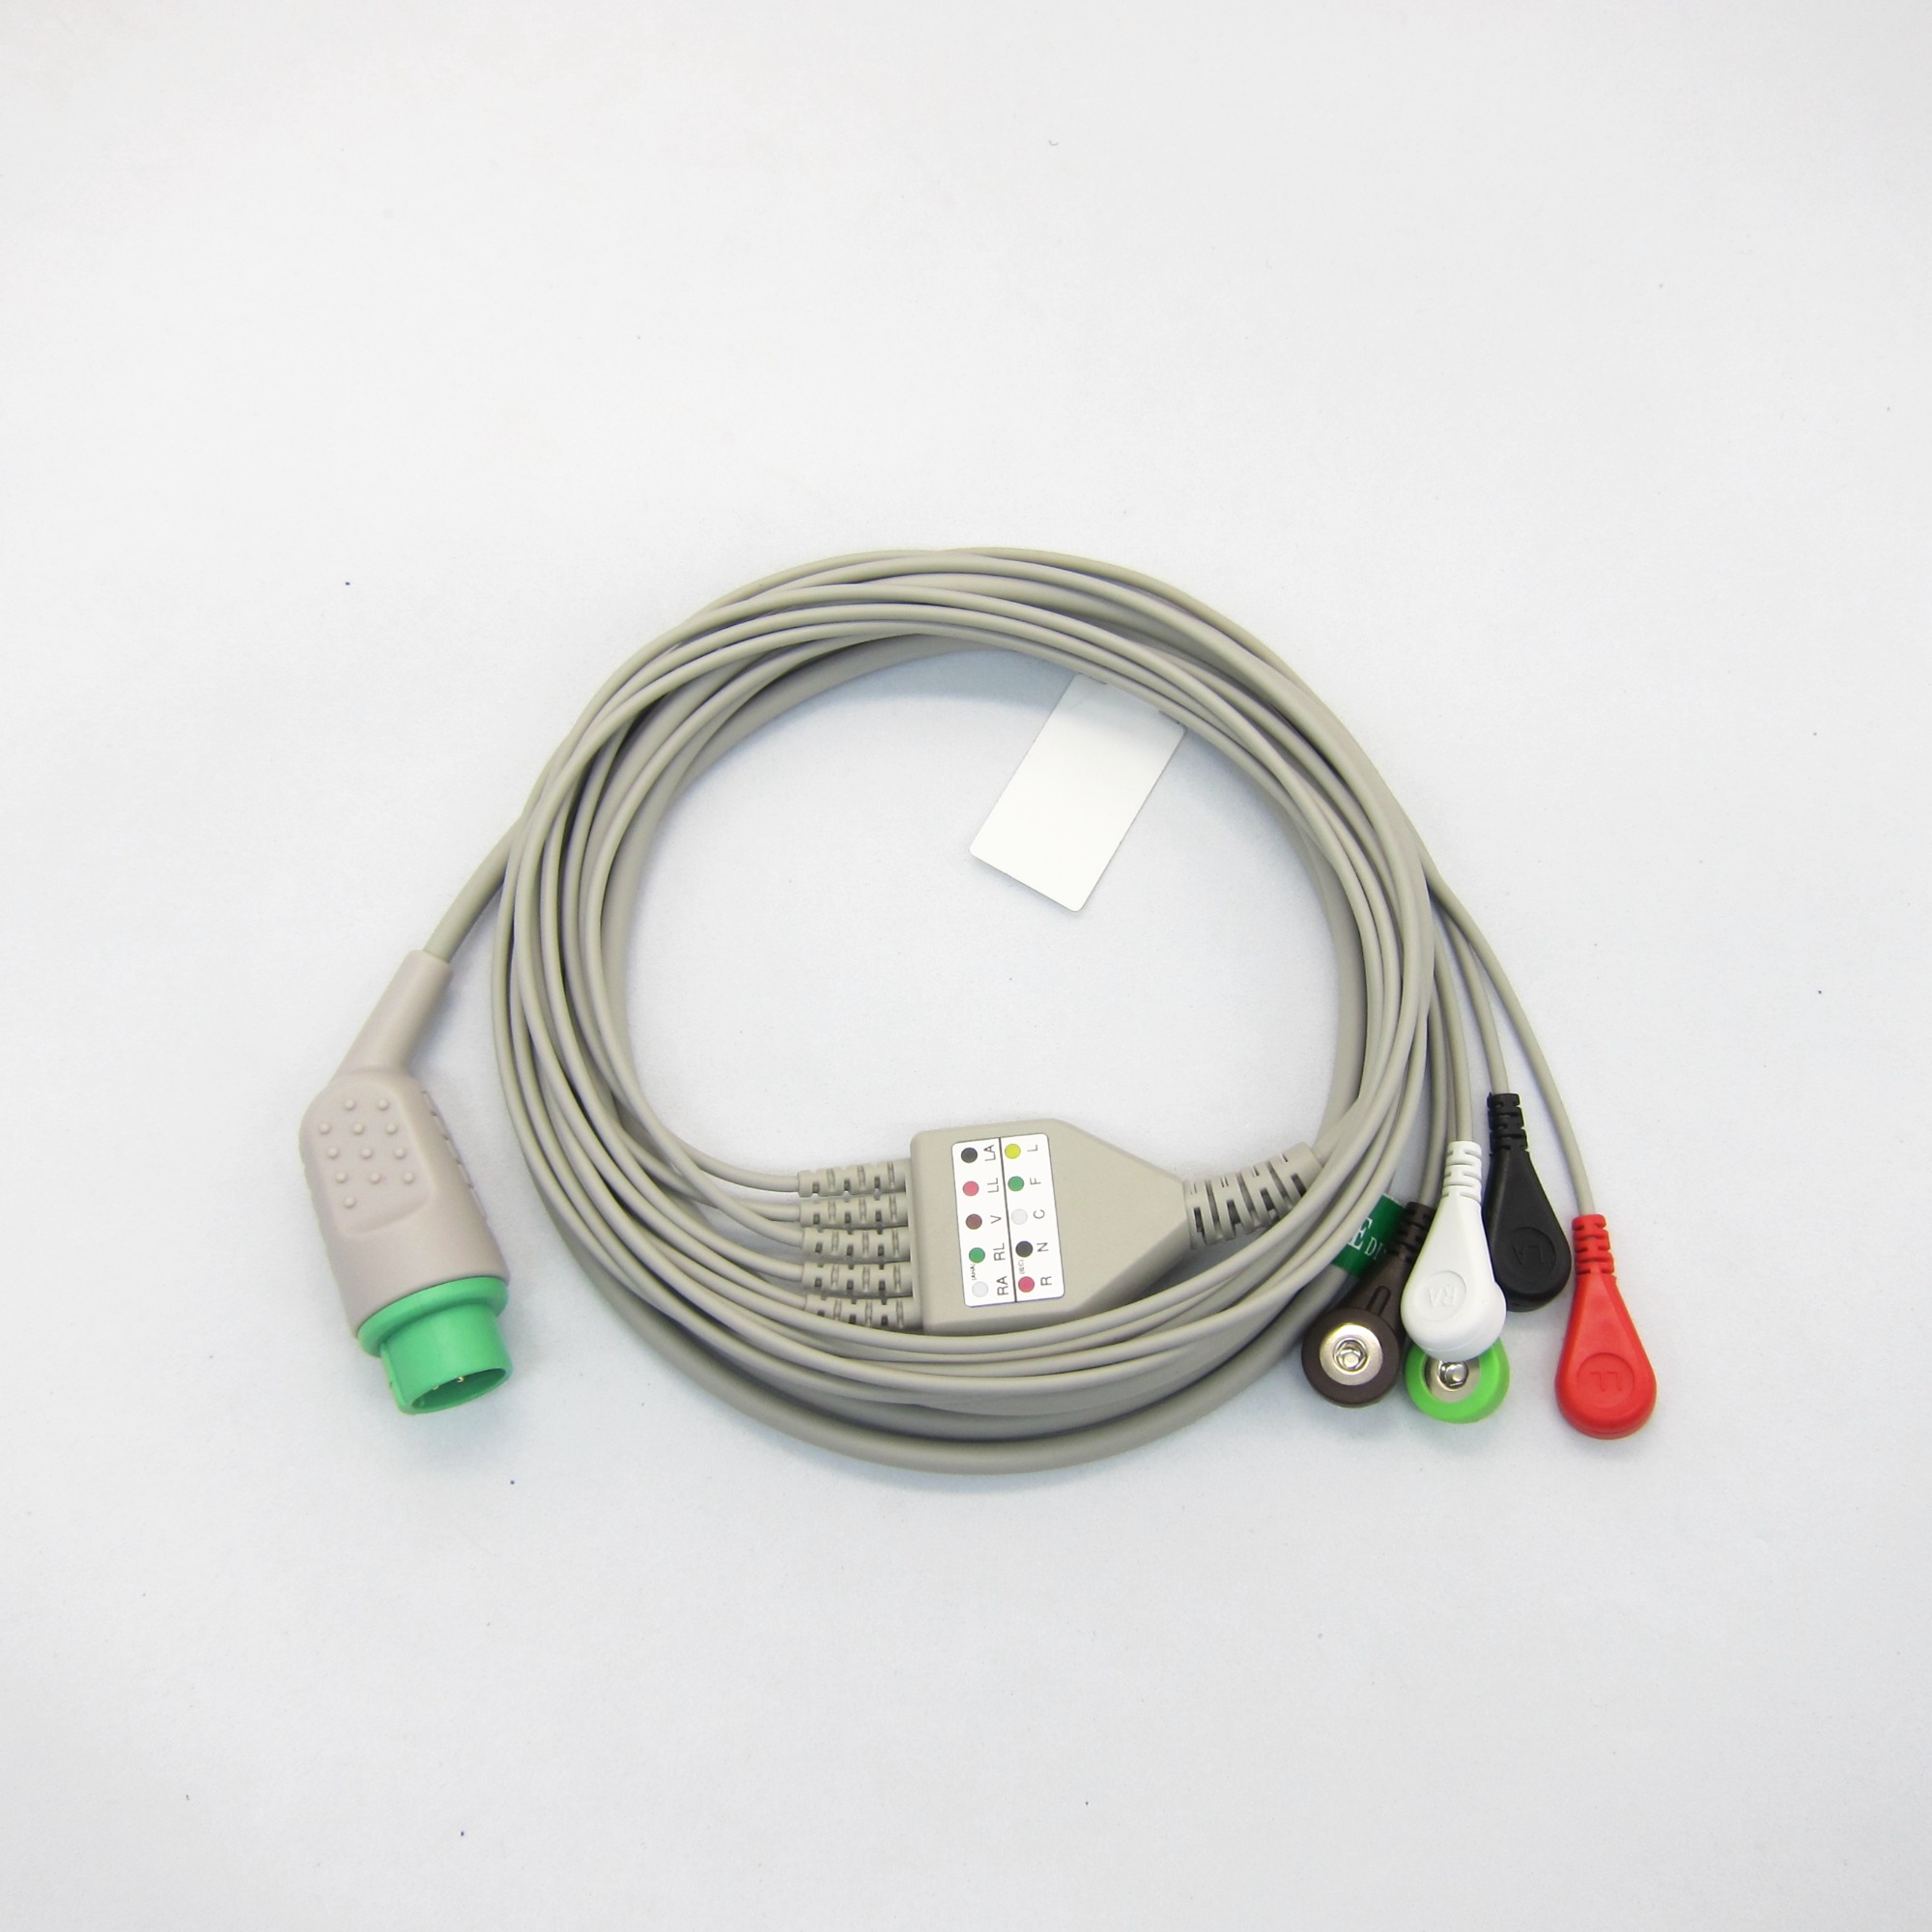 Factory supplier One-piece 3 or 5 Leads Snap Or Clip ECG cable and leadwires for biolight M-series